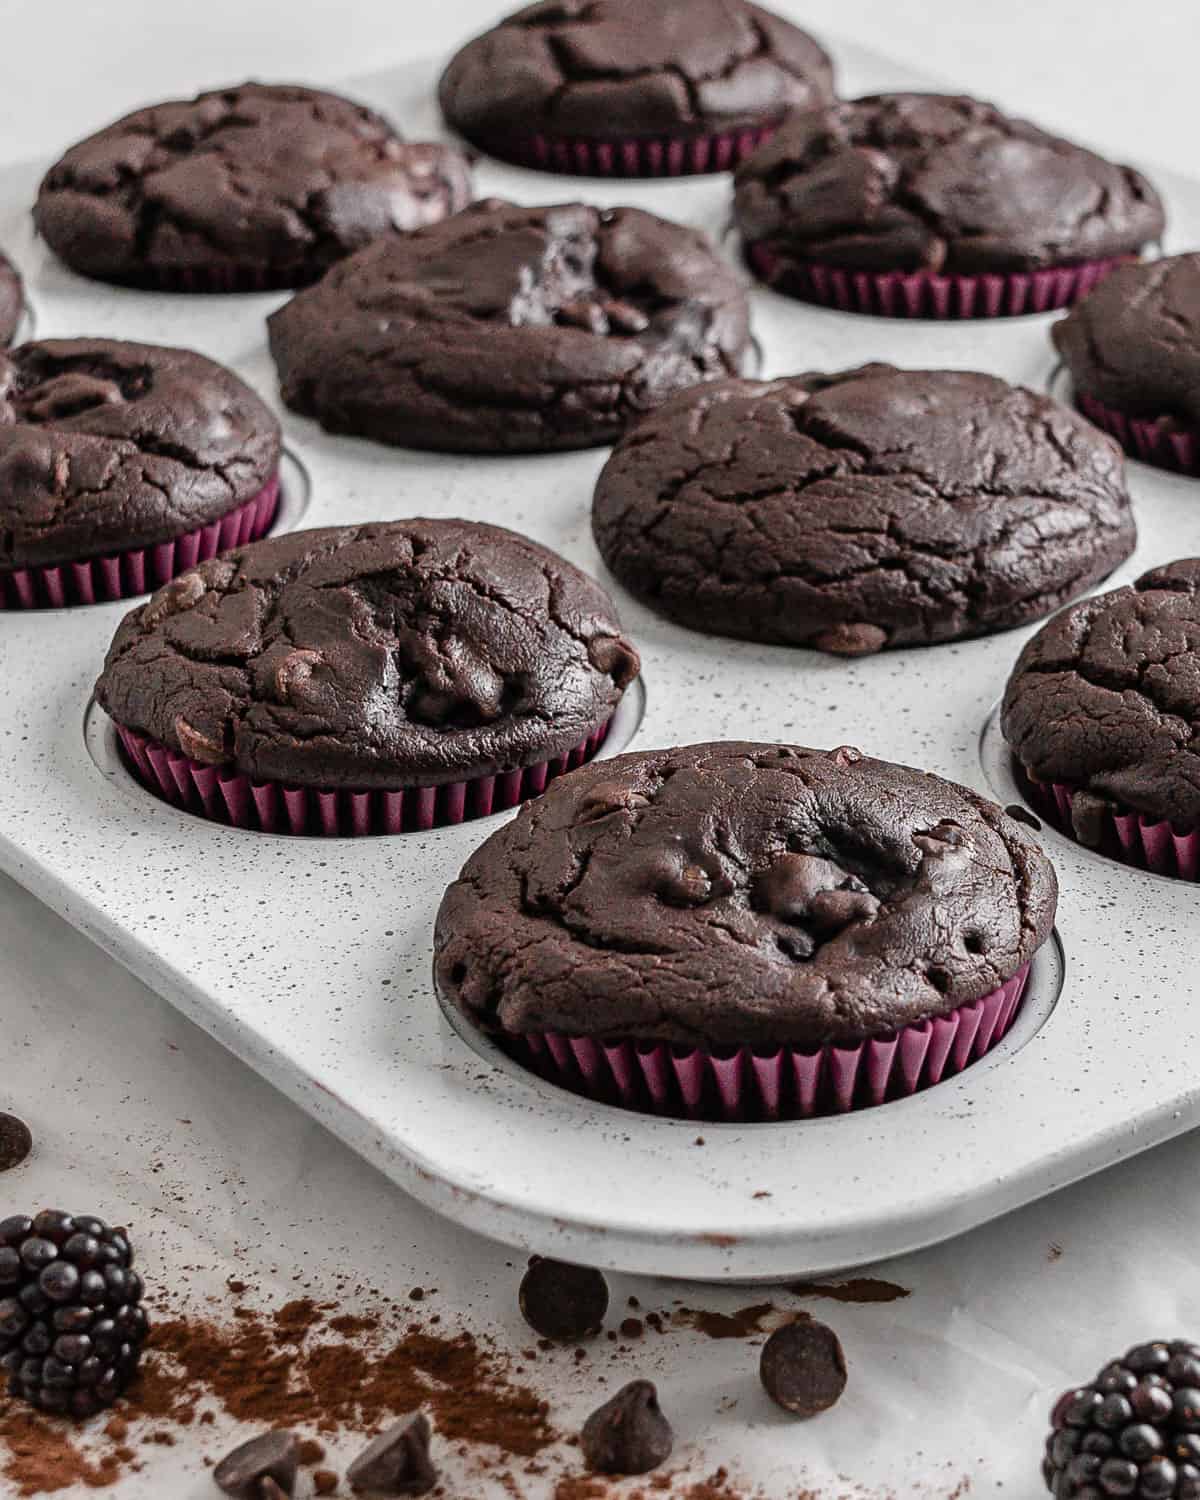 completed Blackberry Chocolate Cupcakes without icing on top in muffin tin